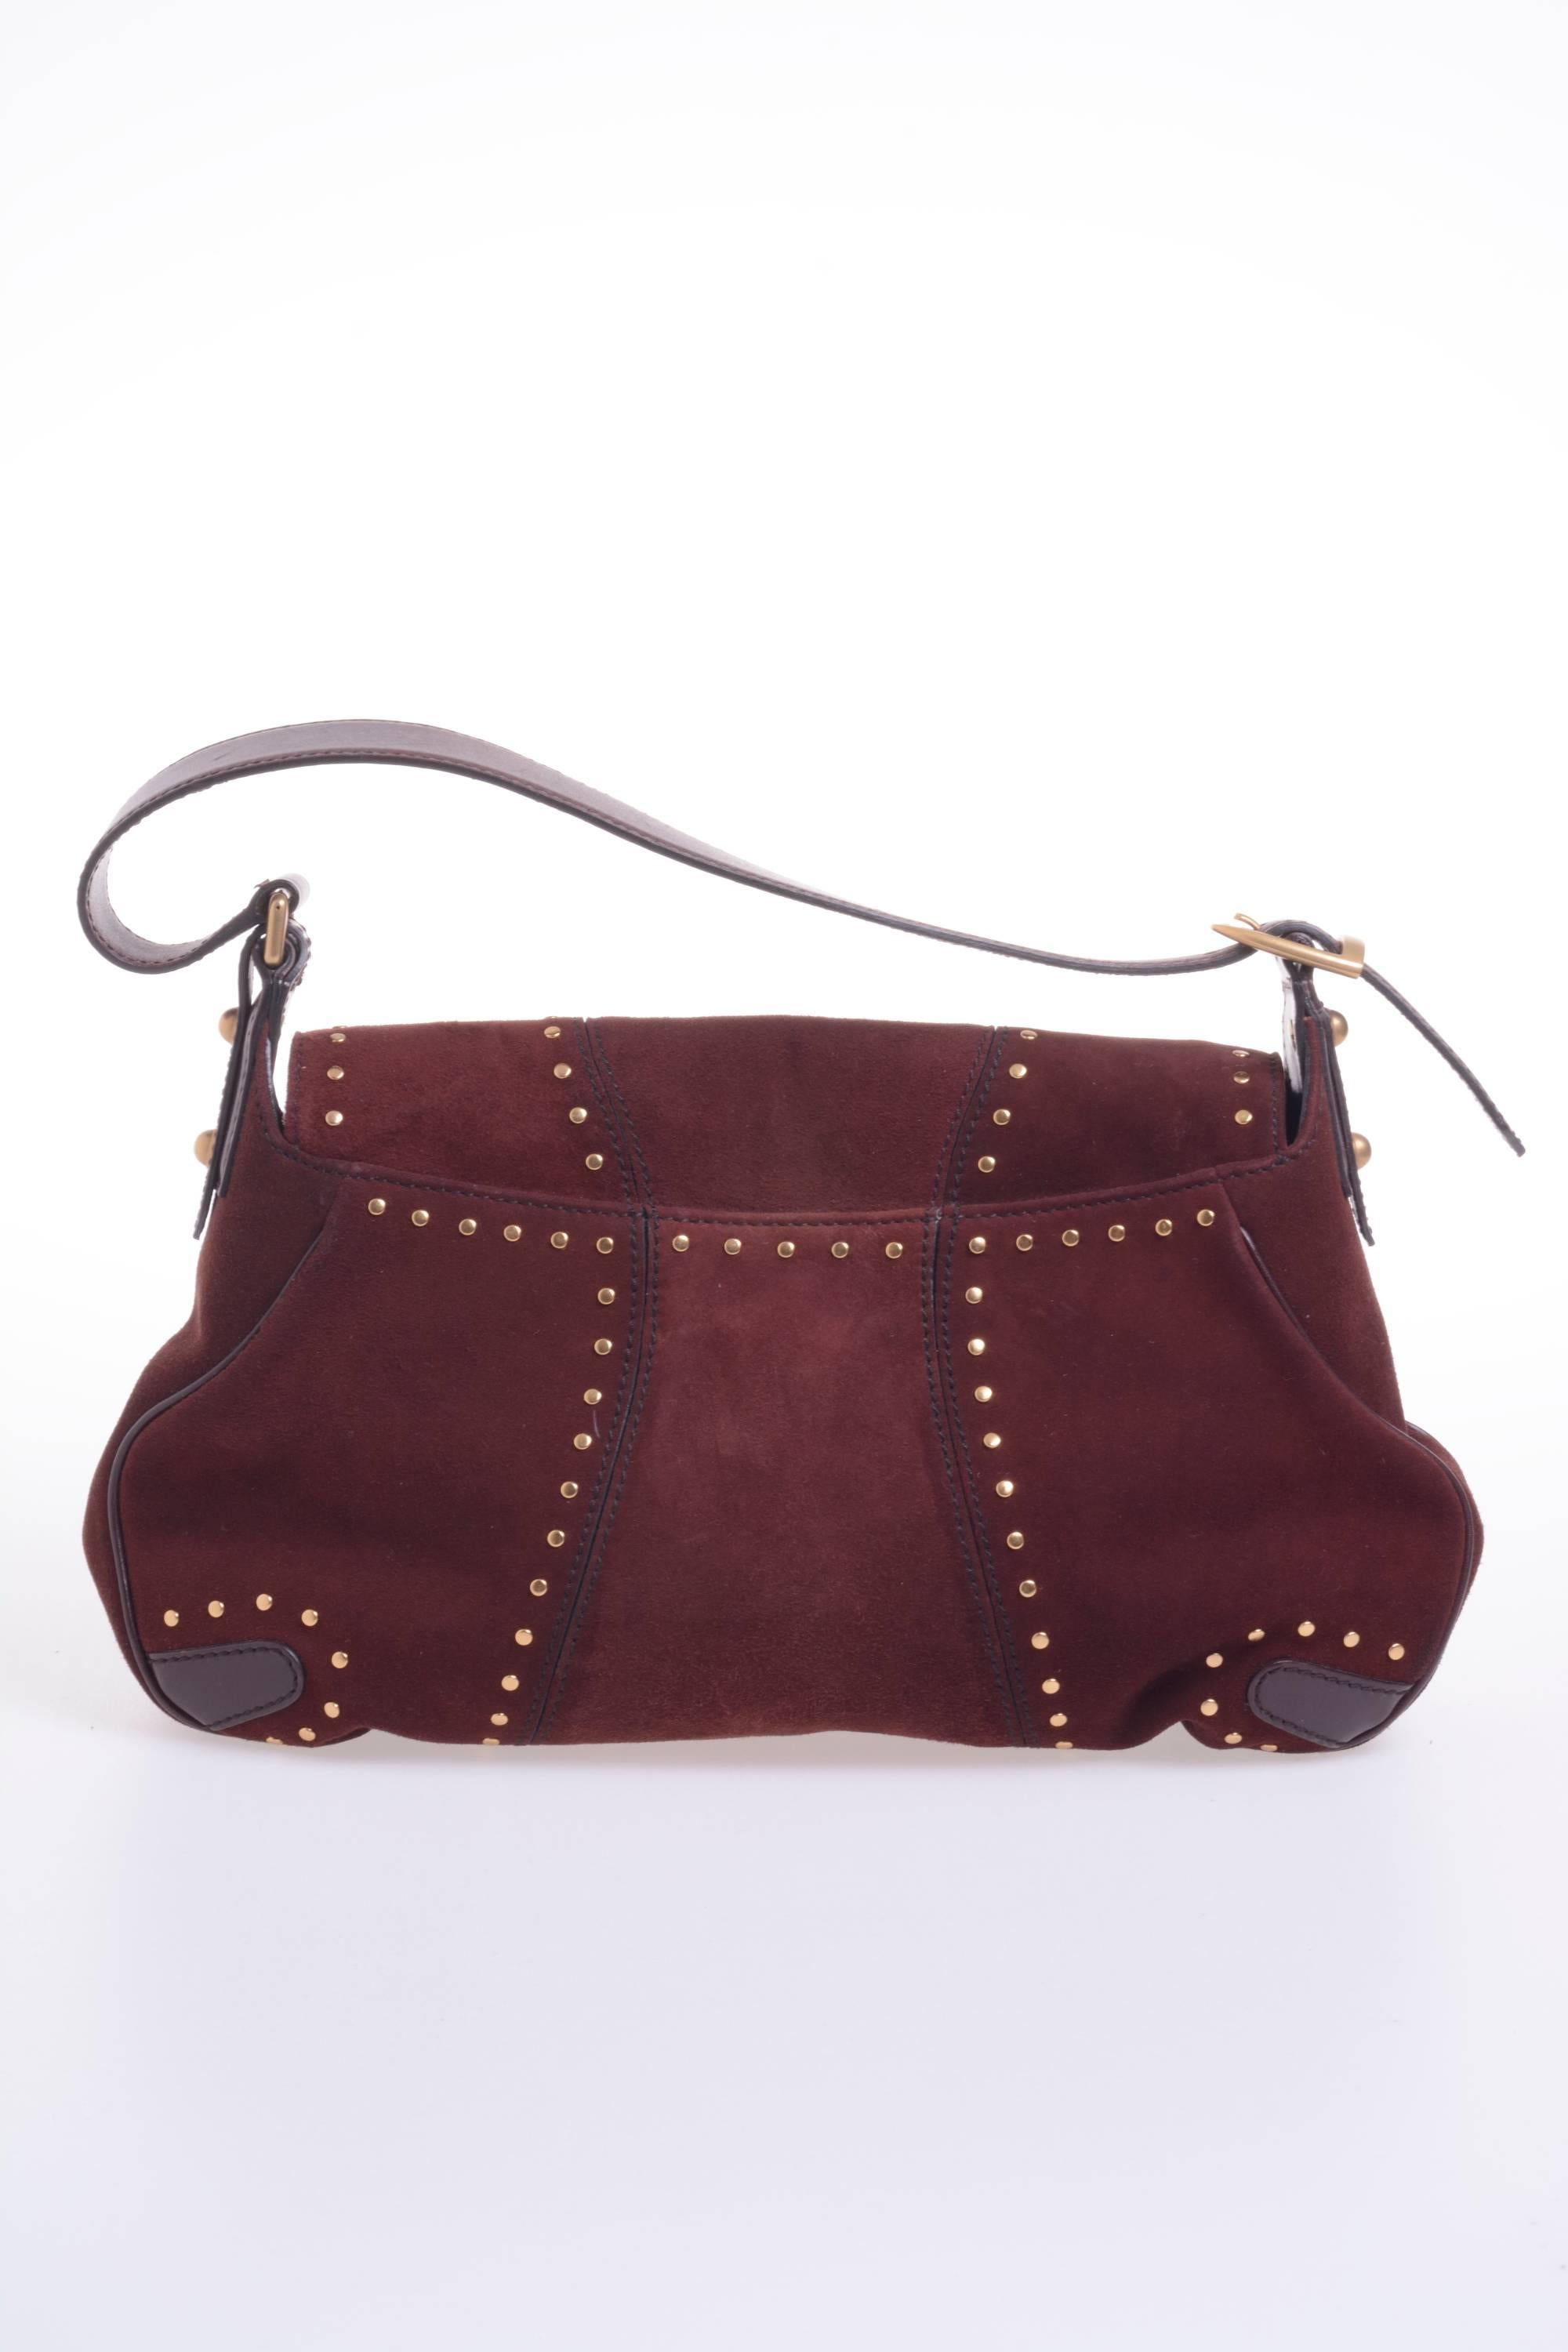 GUCCI Leather Bordeaux horsebit shoulder bag, with decorative gold studs and frontal gold horsebit and chained closure, Hourglass cuts in front and back, adjustable handles, It has leather lining with a zip pocket inside. Made in Italy. 

Style